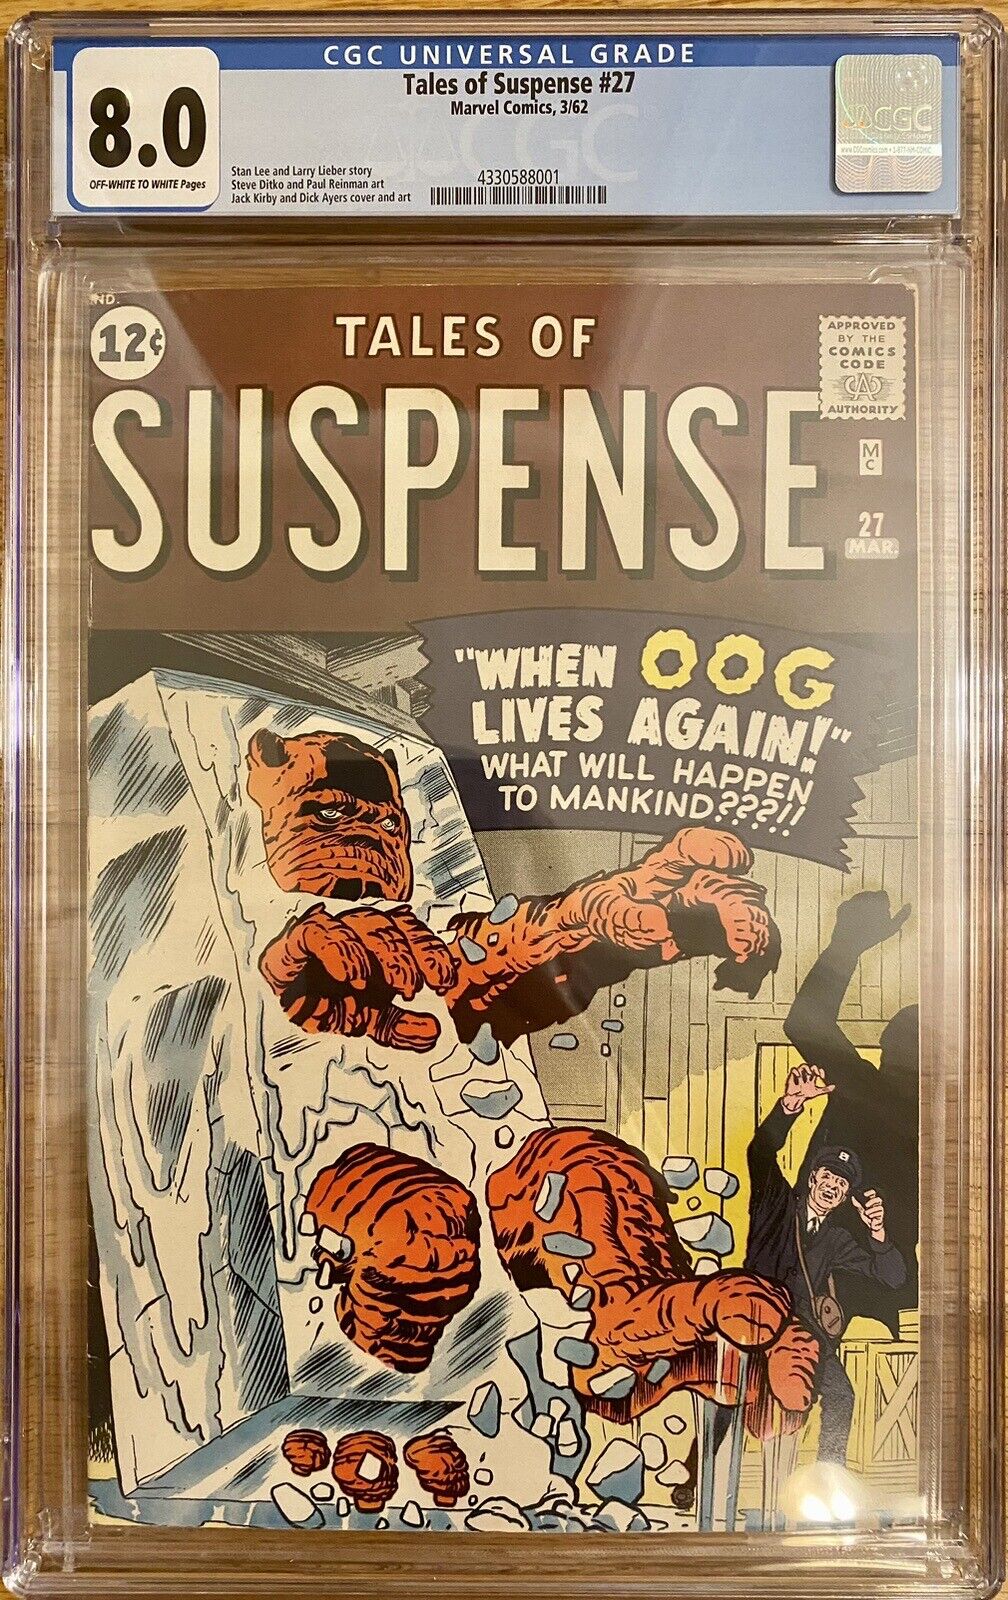 Tales of Suspense #27 - CGC 8.0 - Off Wht to Wht Pgs - Kirby, Ditko & Ayers Art